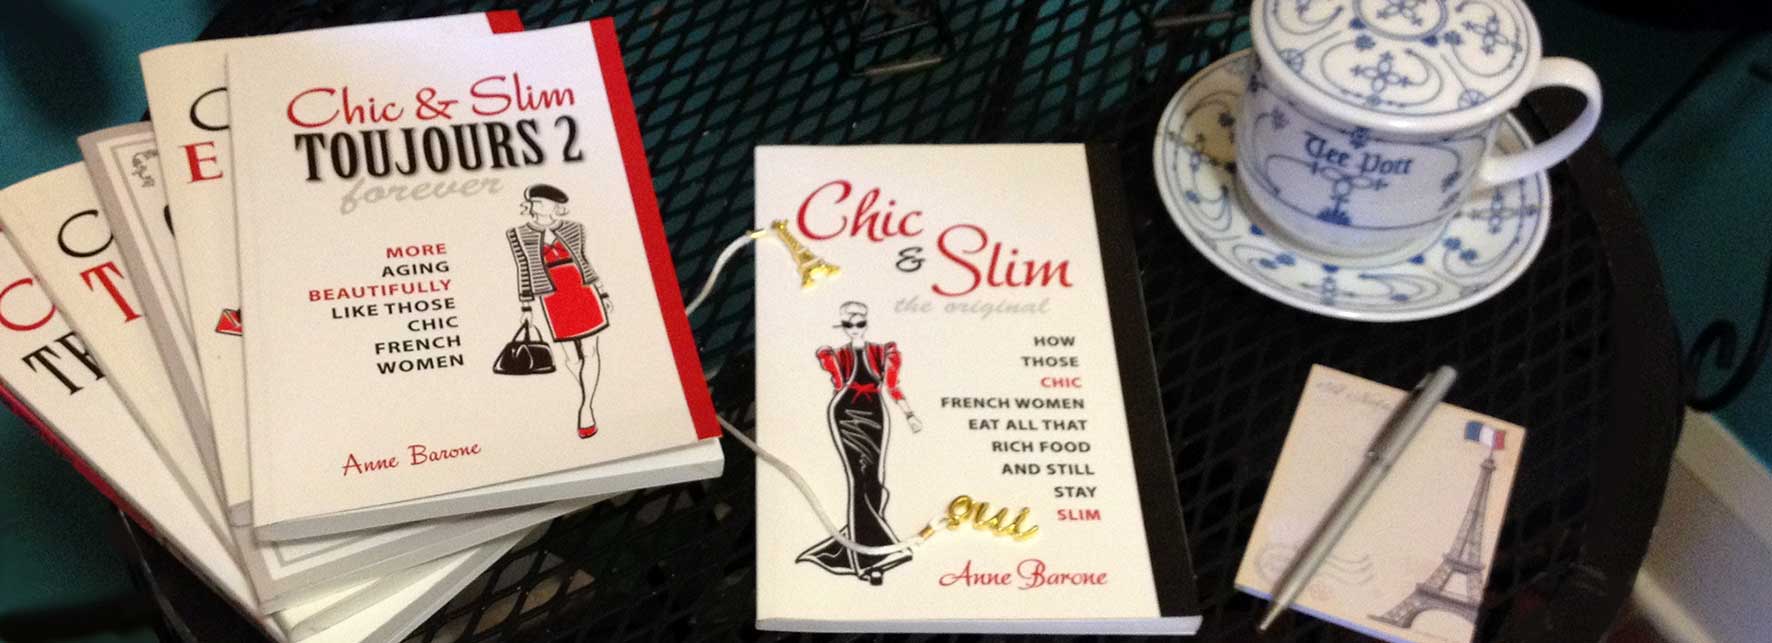 Chic & Slim books arranged on table with bookmark, one-cup German tee pott, notepad & pen